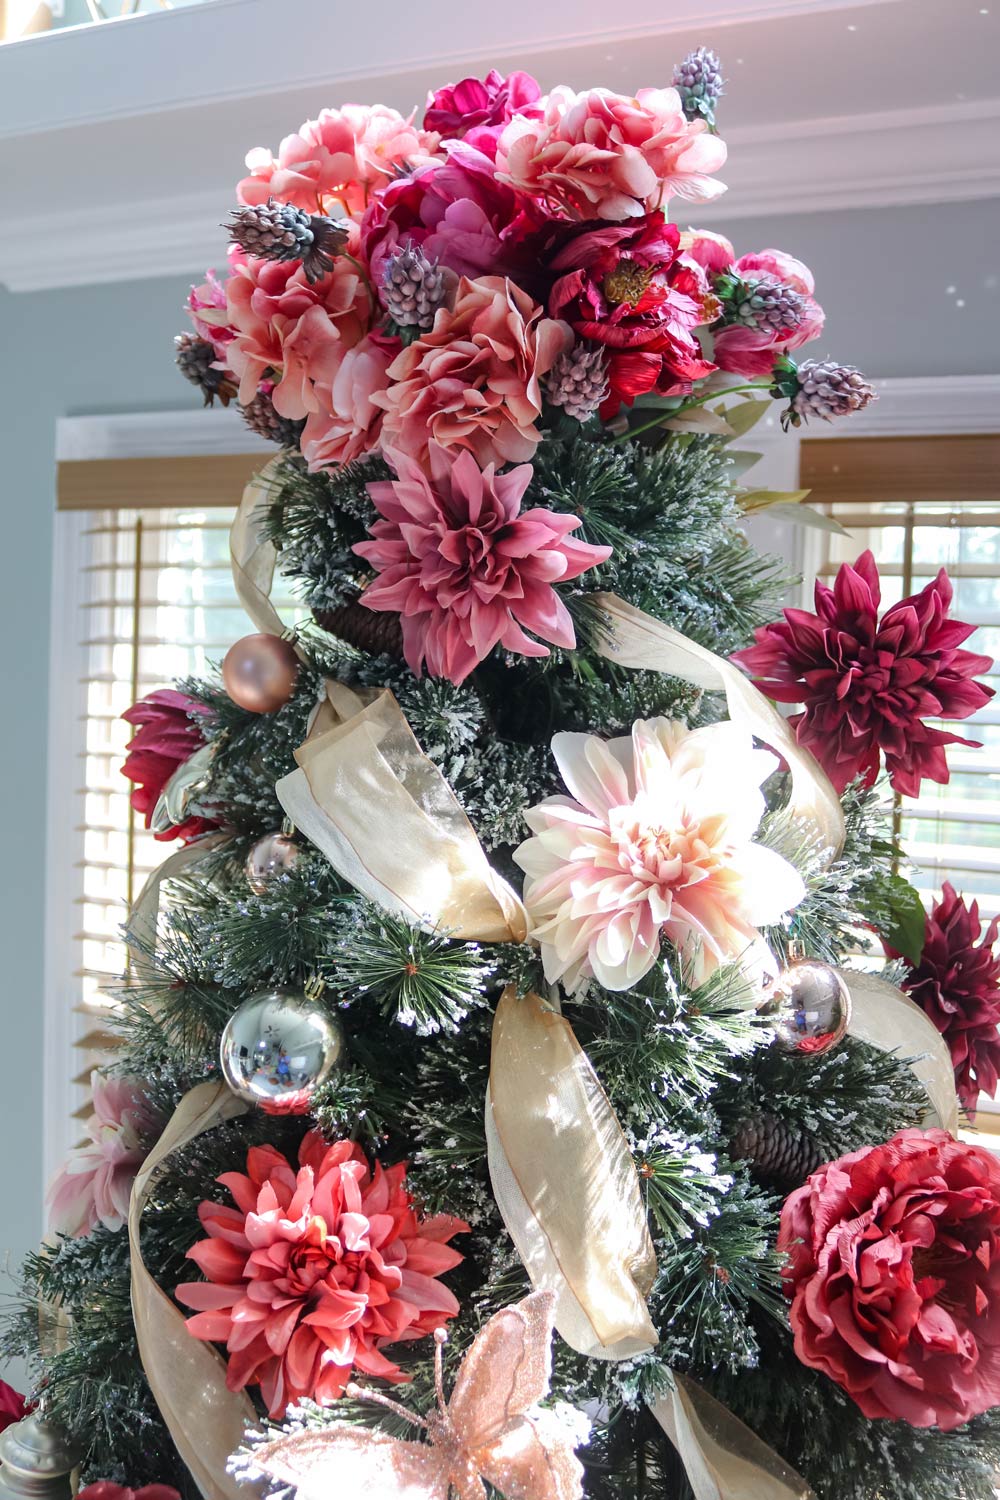 How to Prep Your Home for the Holidays in 5 Easy Steps - The Home Depot